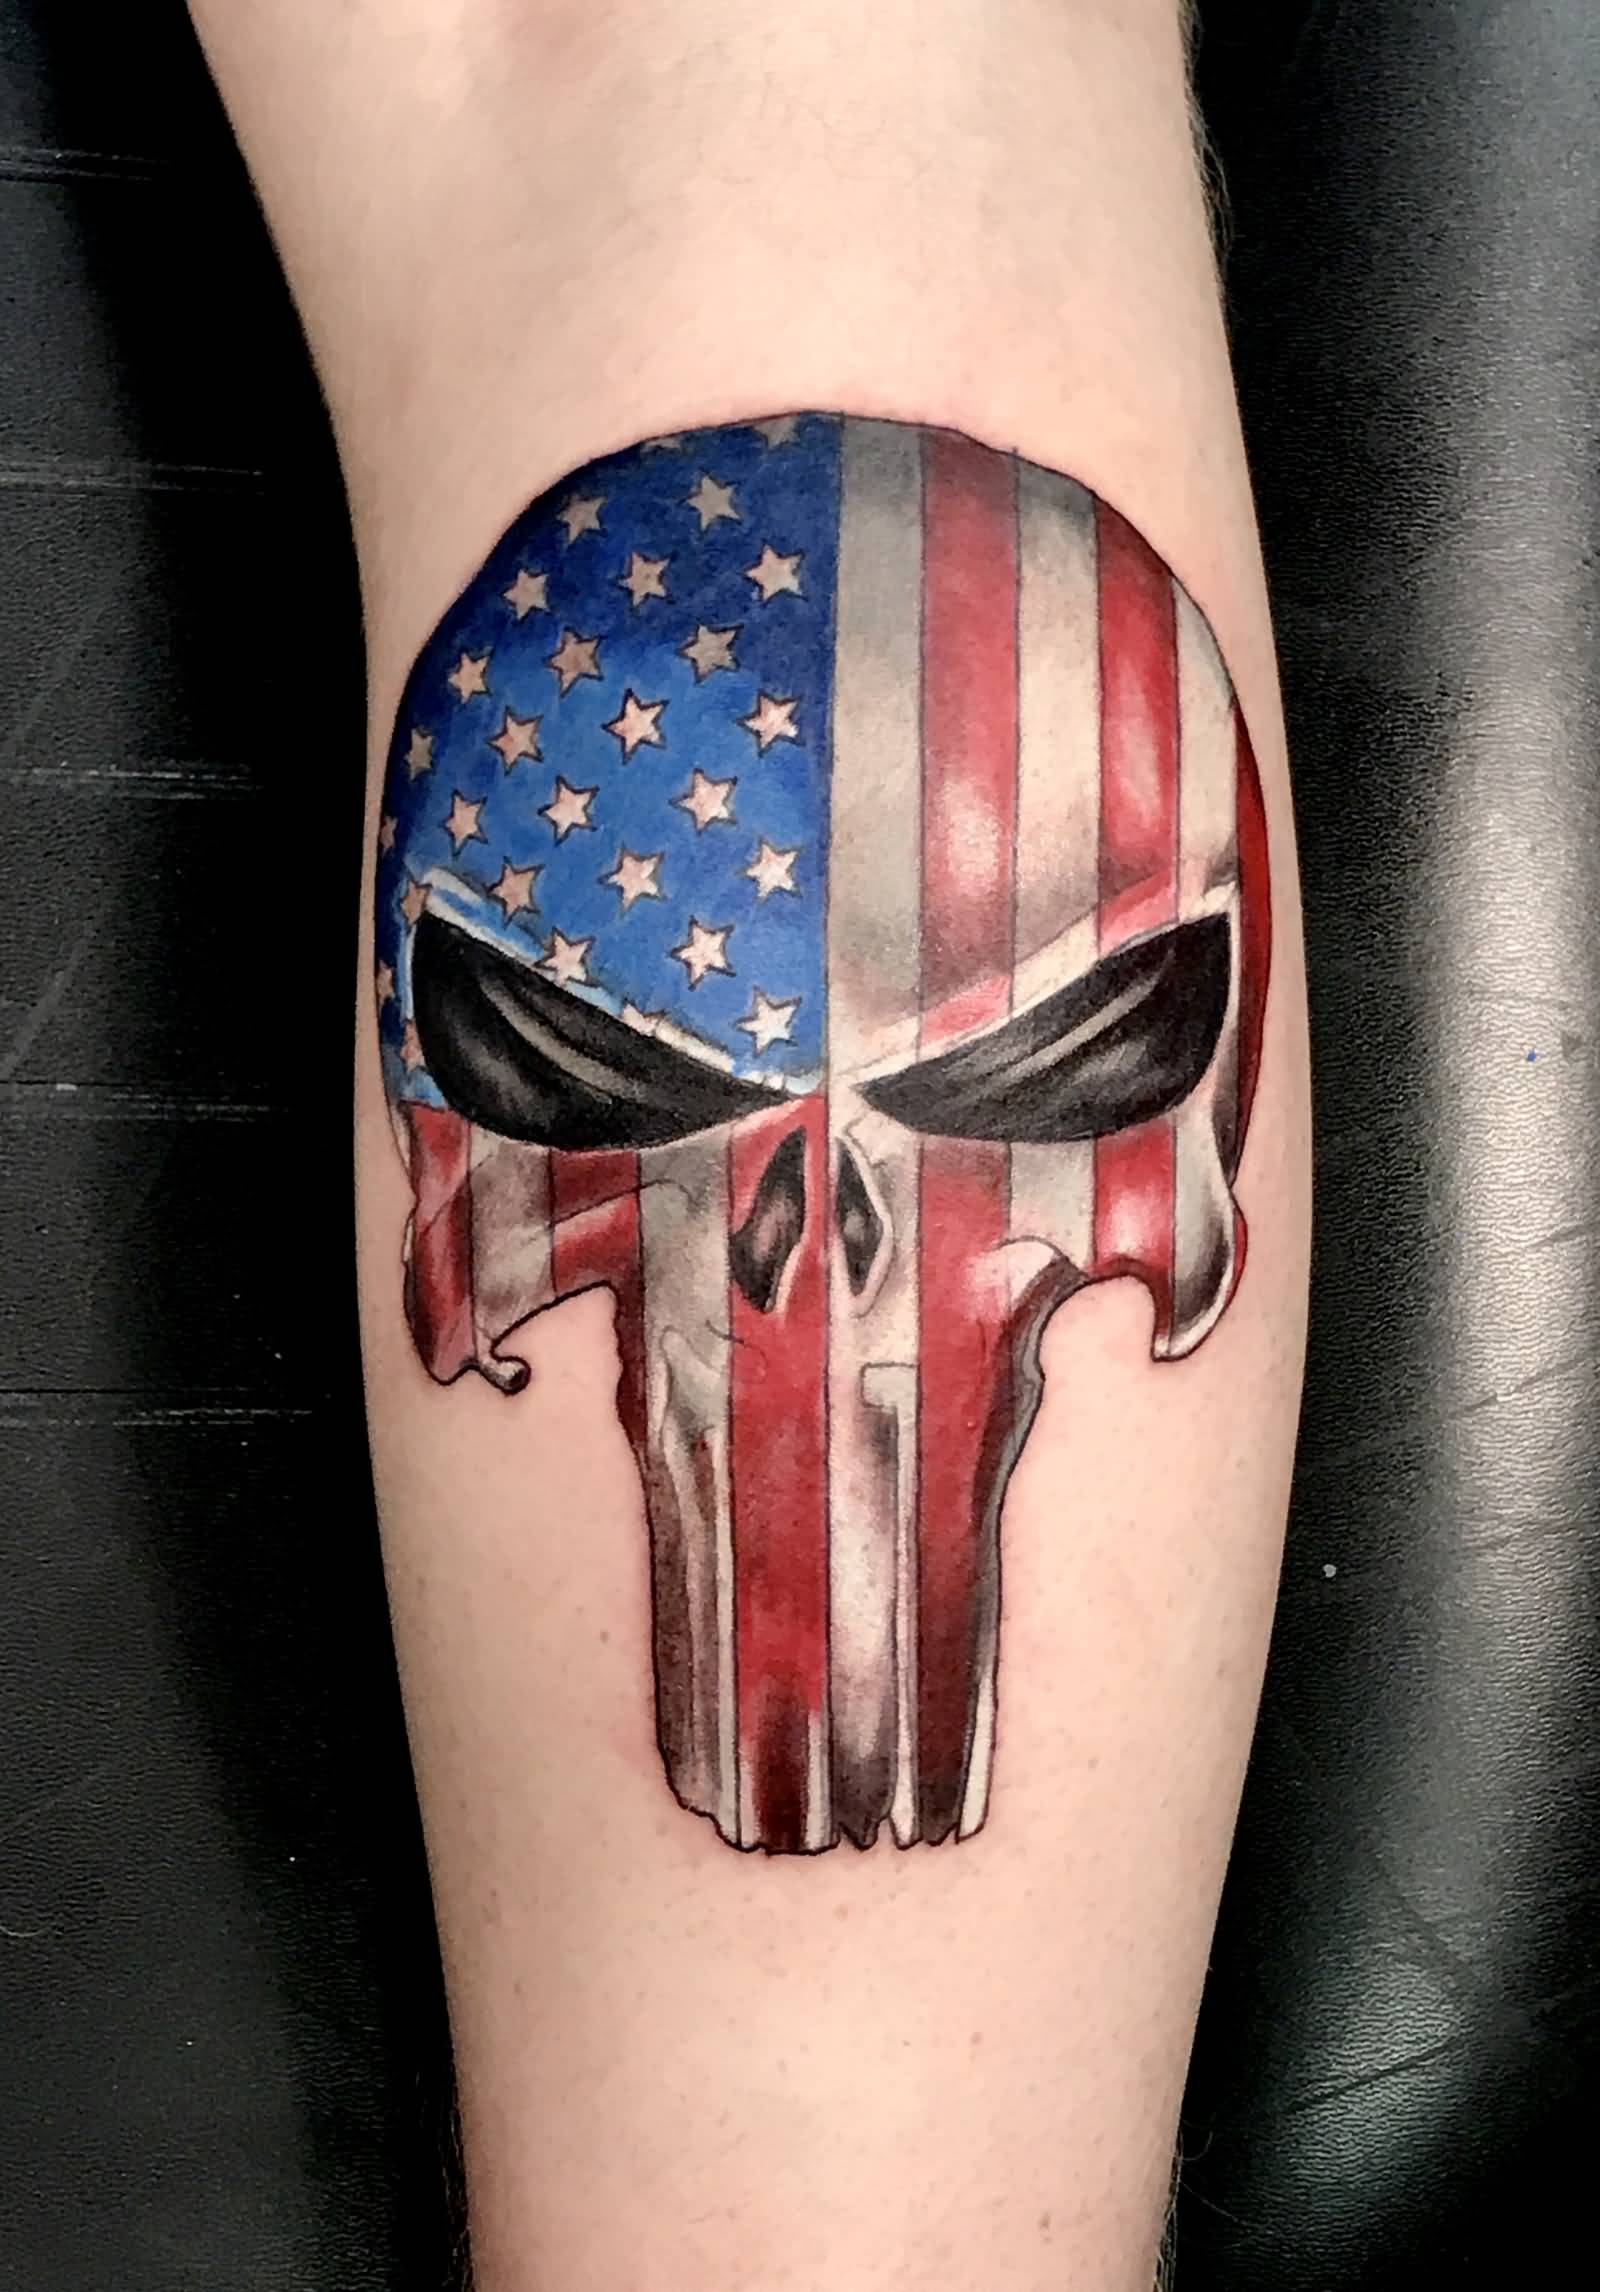 Colored American flag punisher tattoo on arm by Dan Bires.